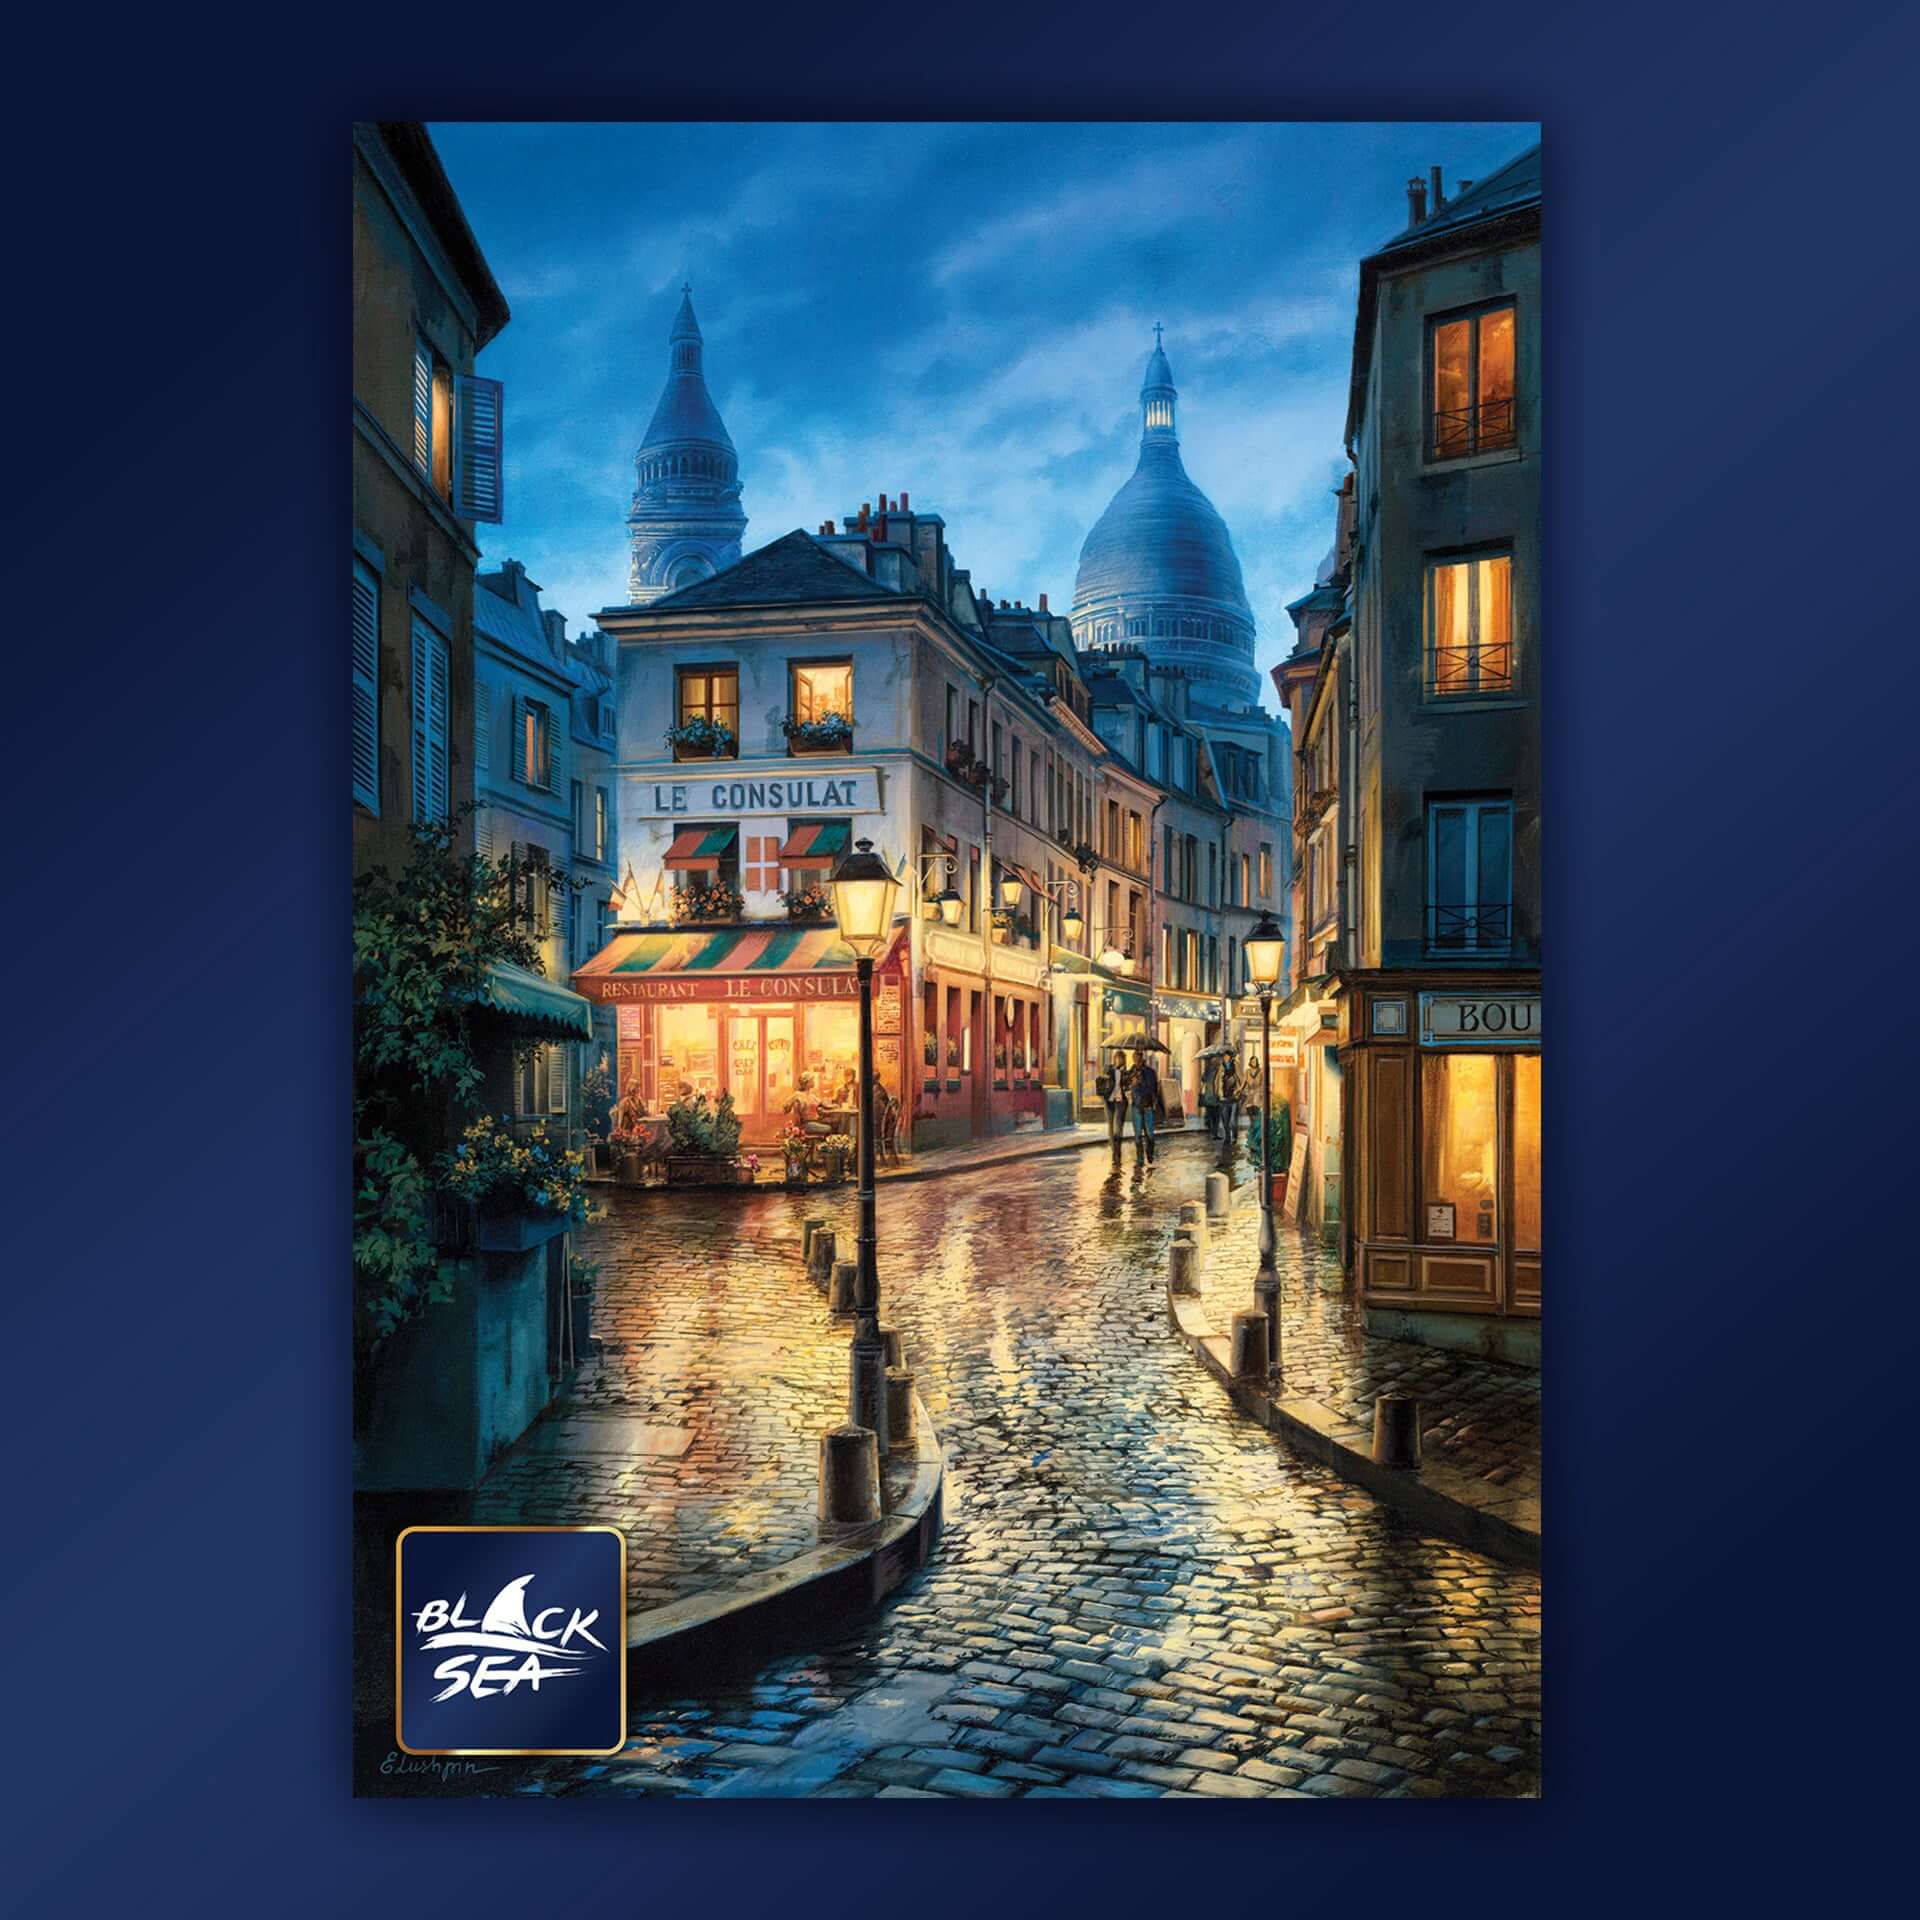 Puzzle Black Sea 1000 pieces - Do You Remember How We Met?, I remember how we met; I remember how your beauty glowed on the small square. The sun was setting but your smile brought light to everything. We walked along the wet street that wound between coz